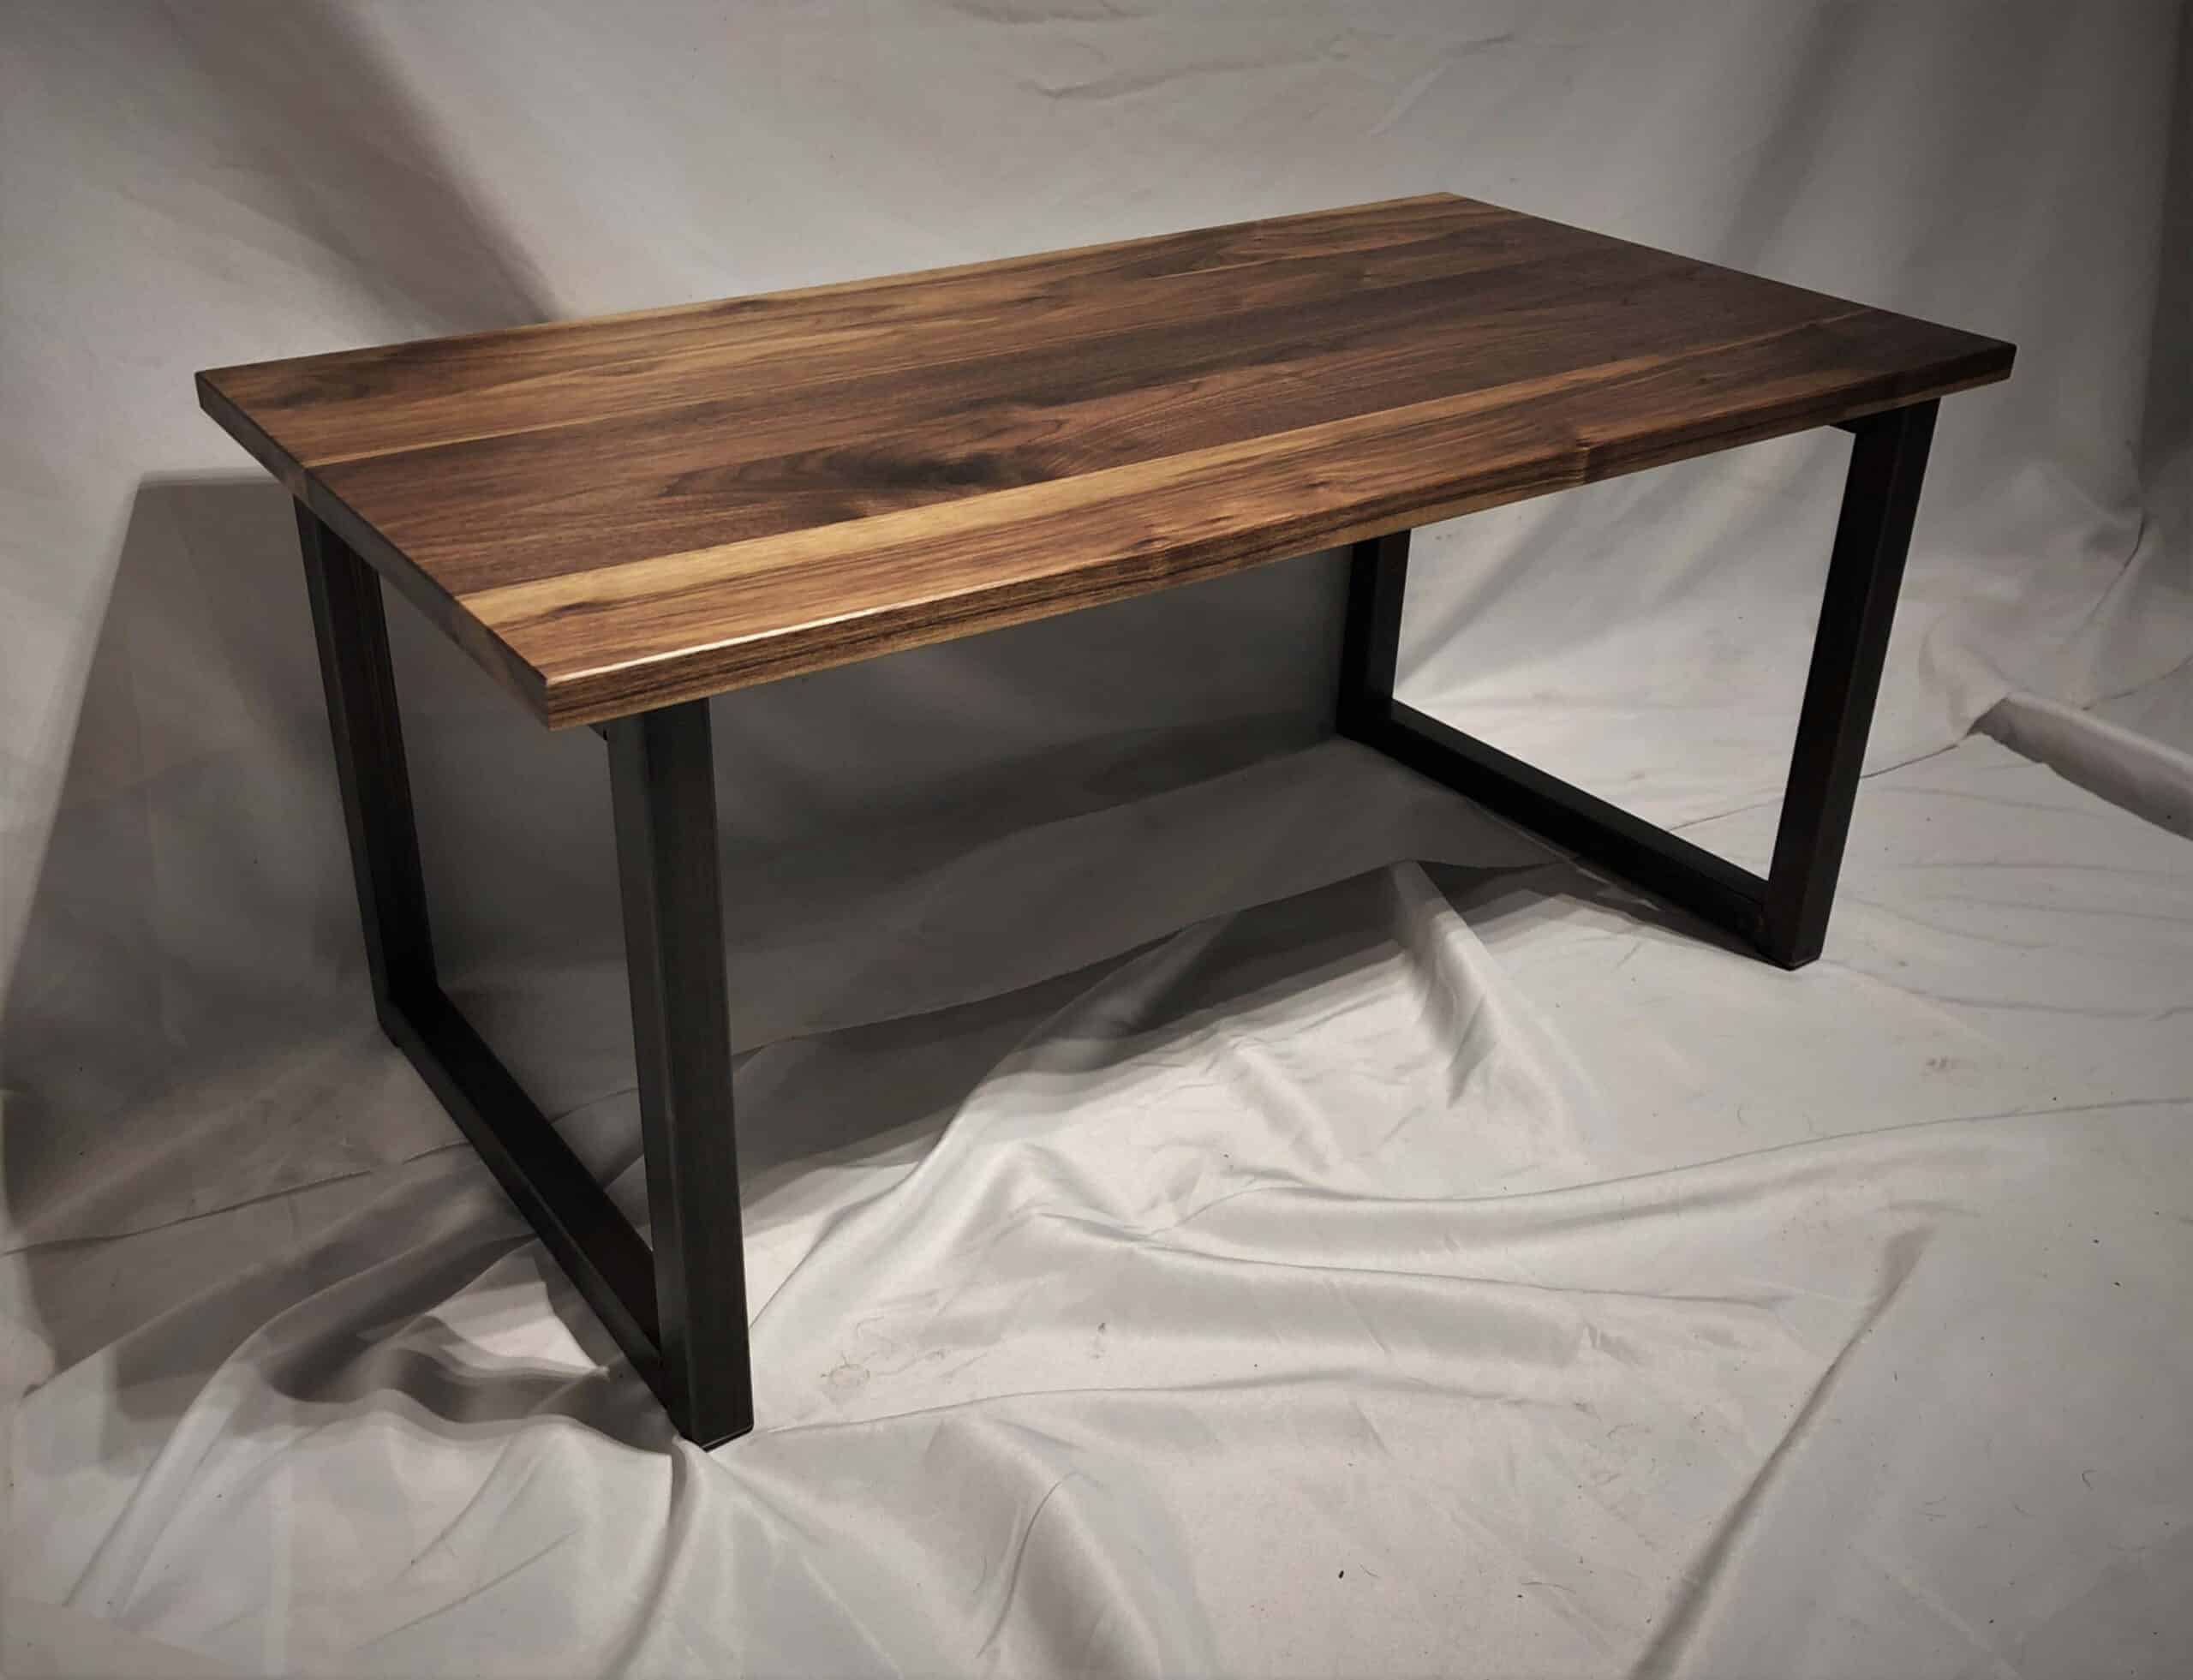 Featured image for “Turner Minimalist-Industrial Coffee Table”